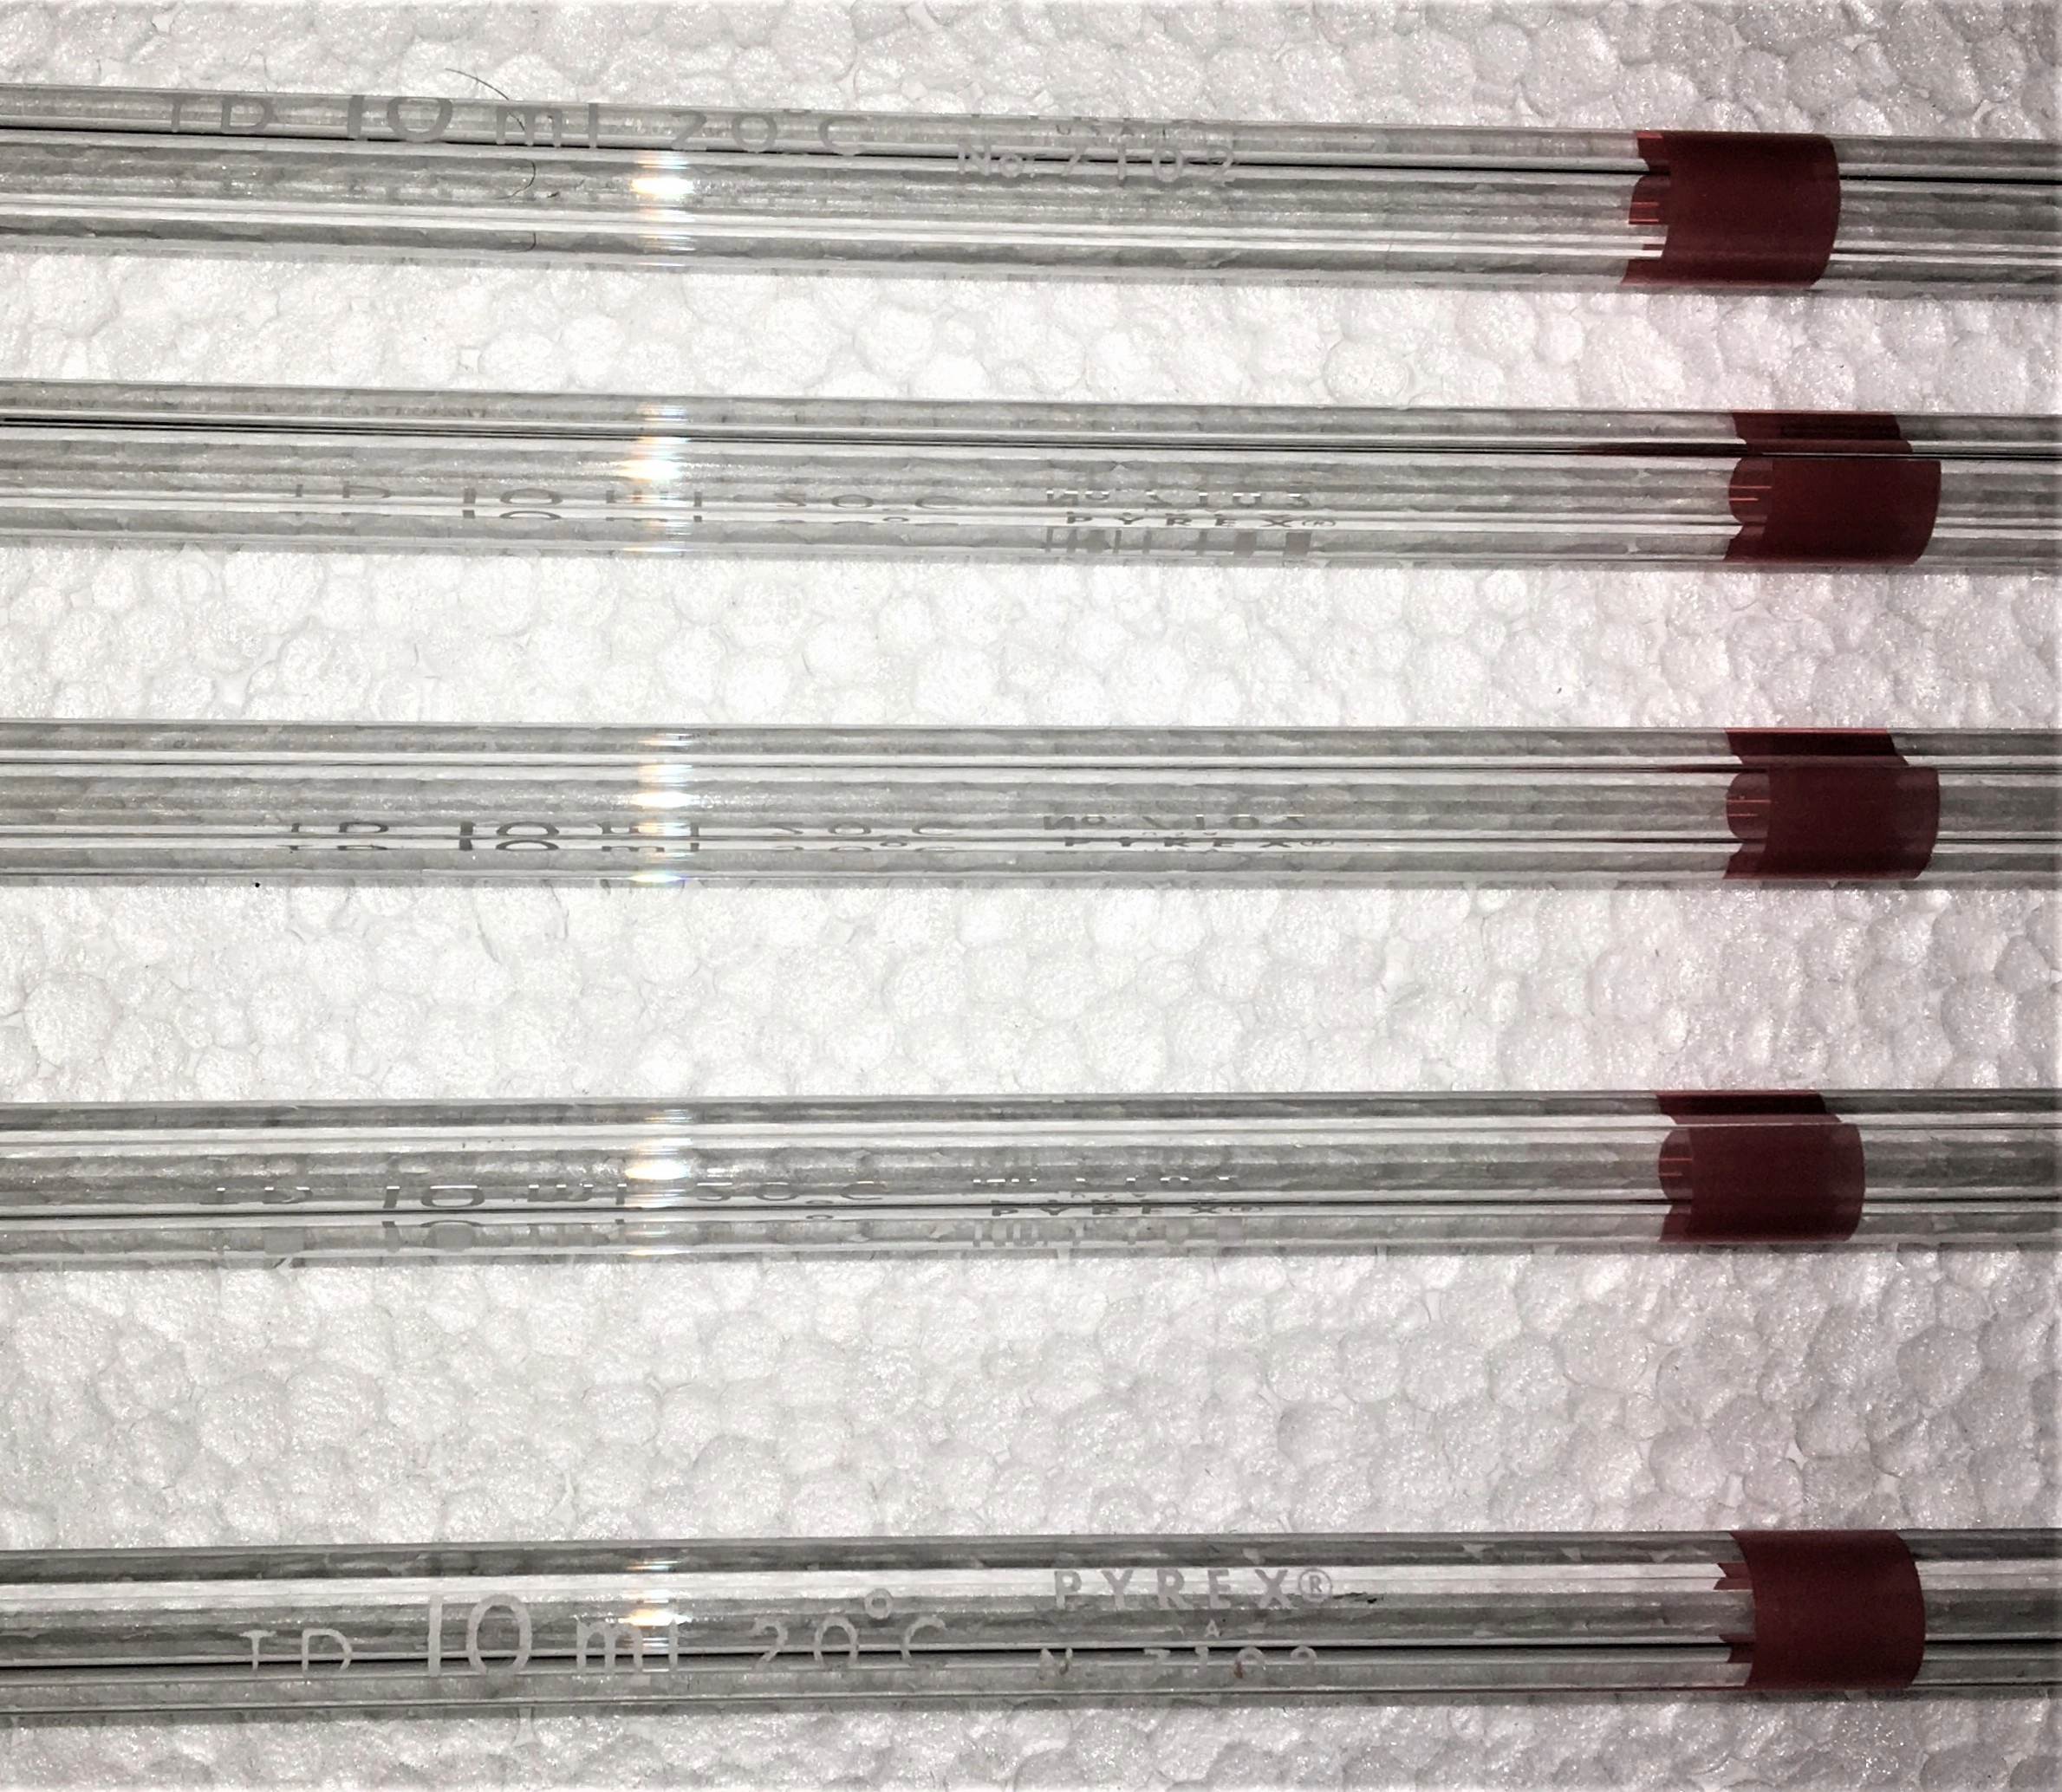 Corning PYREX Reusable Class A Volumetric Pipets, Color-Coded 10 mL:Pipet